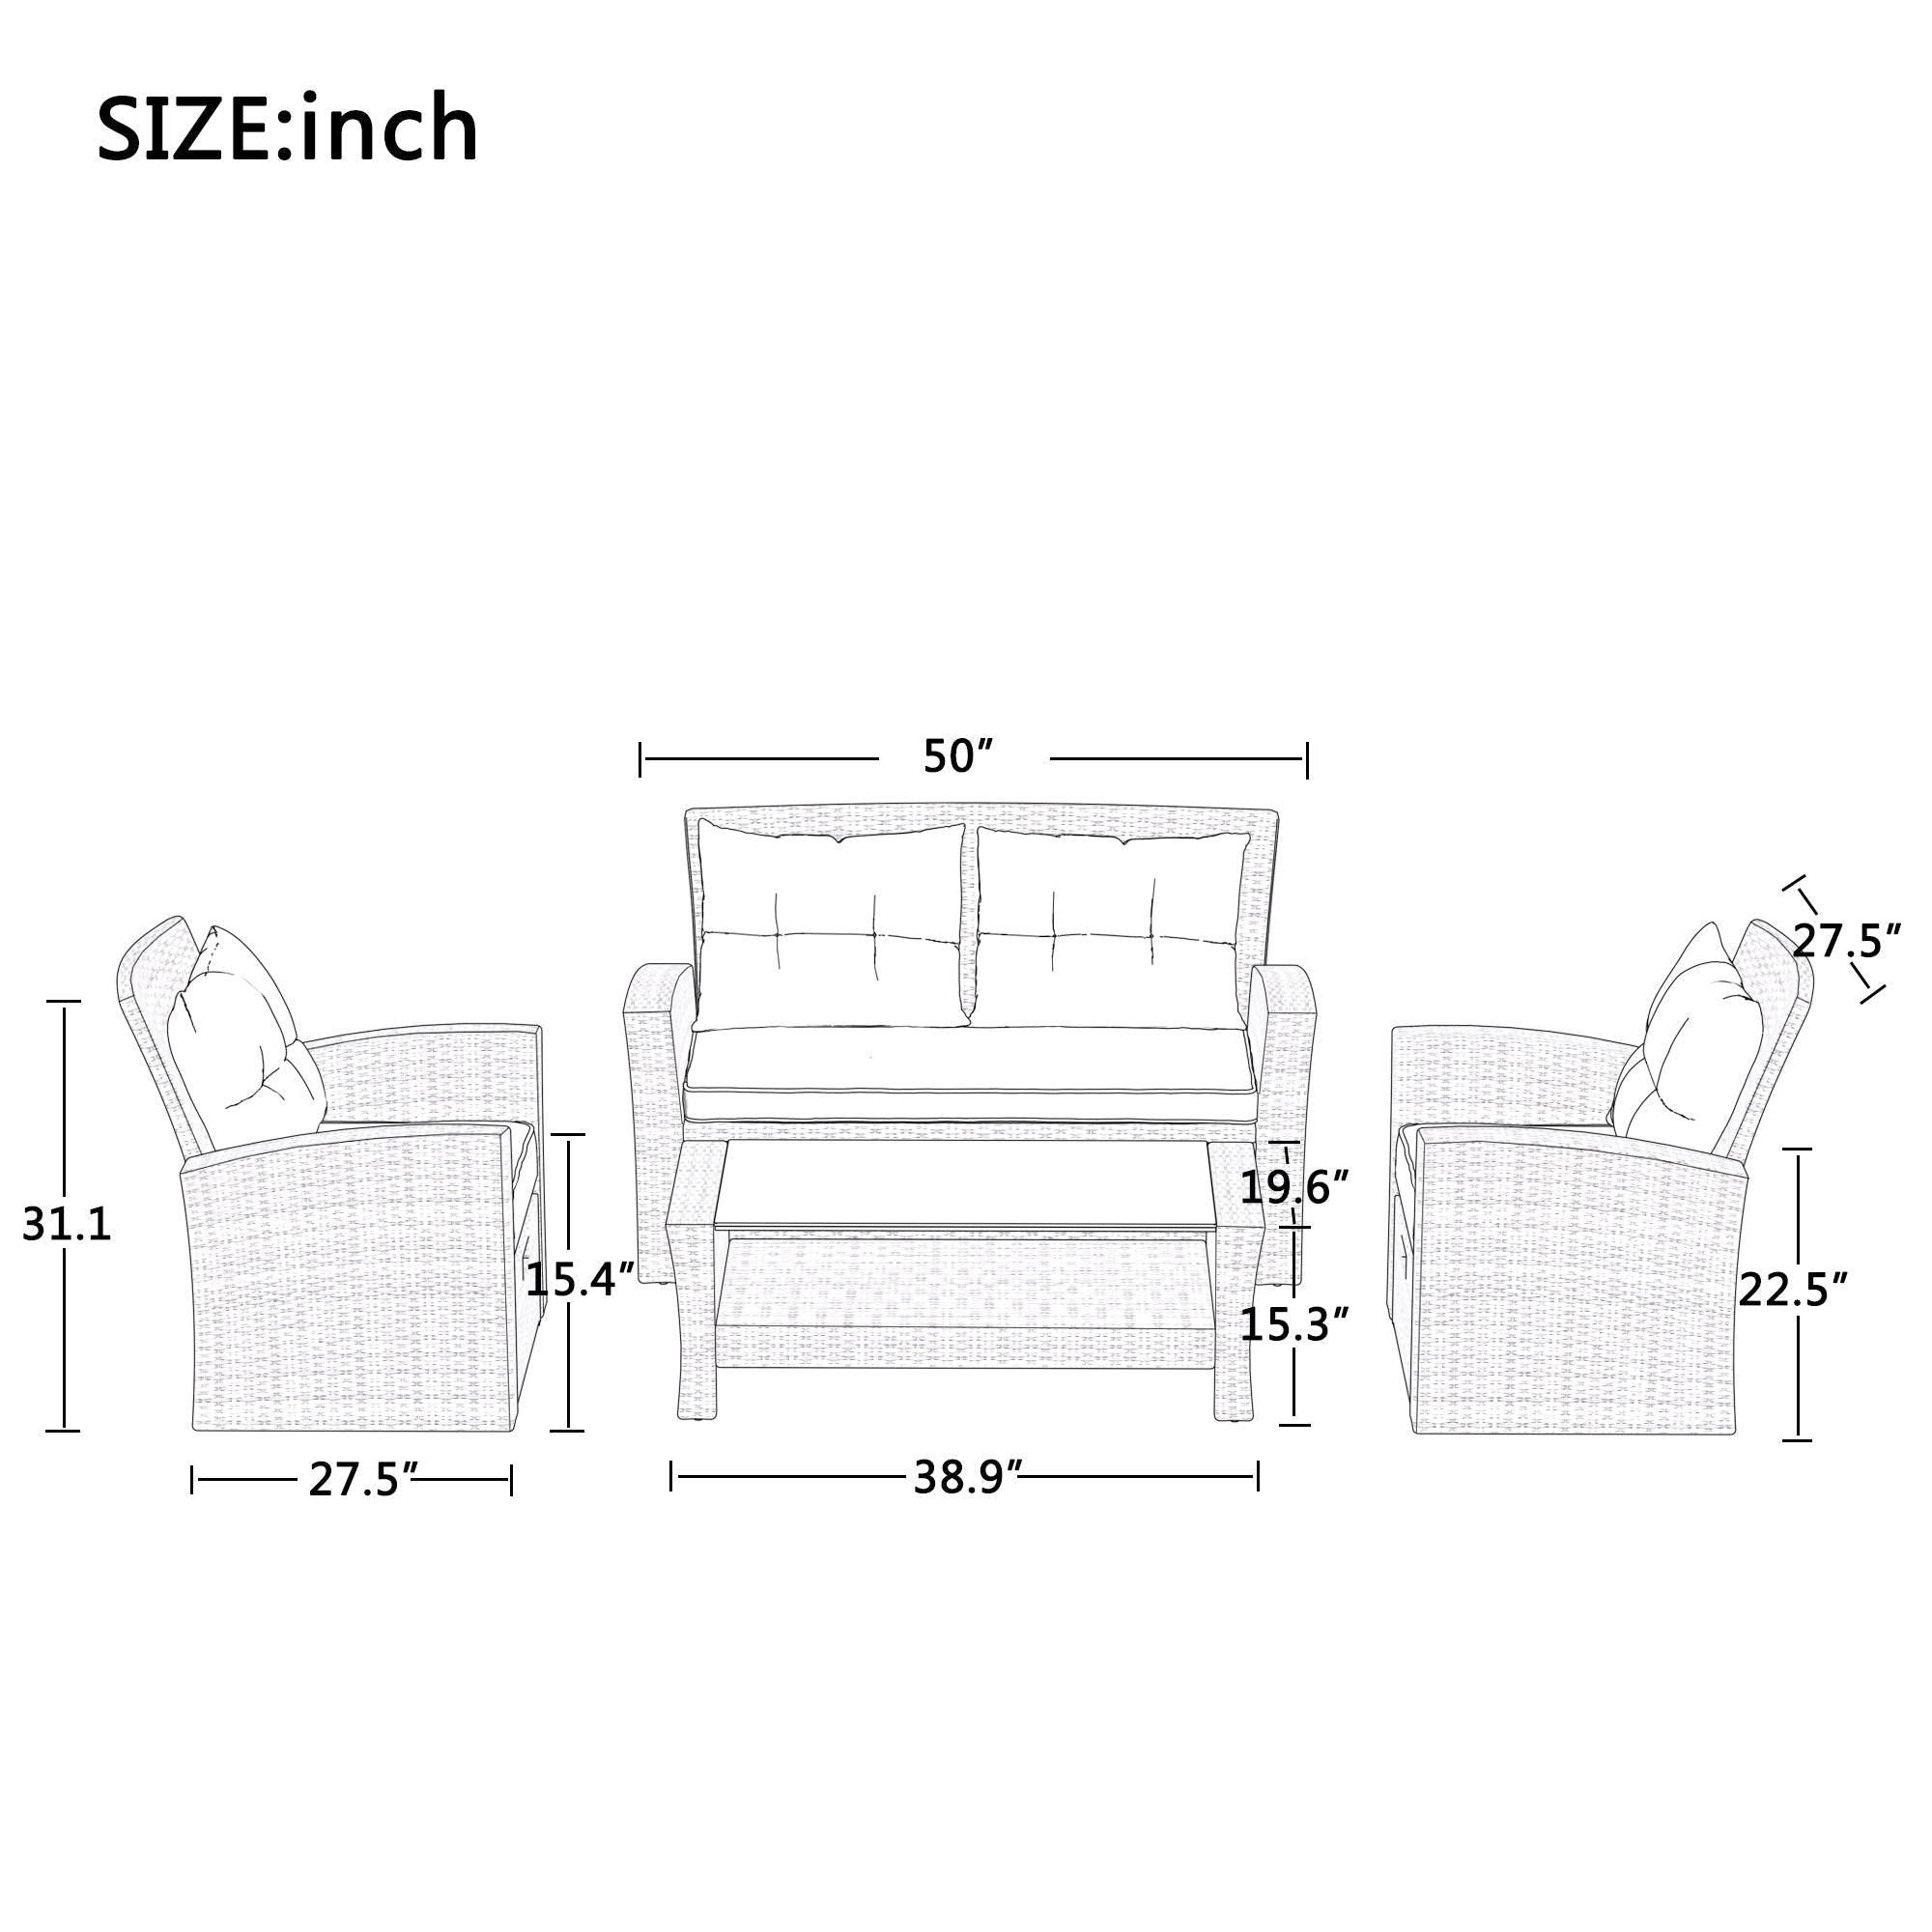 U-Style Patio Furniture Set: 4-Piece Outdoor Conversation Set with All-Weather Wicker Sectional Sofa, Ottoman, and Cushions | Perfect for Your Outdoor Space